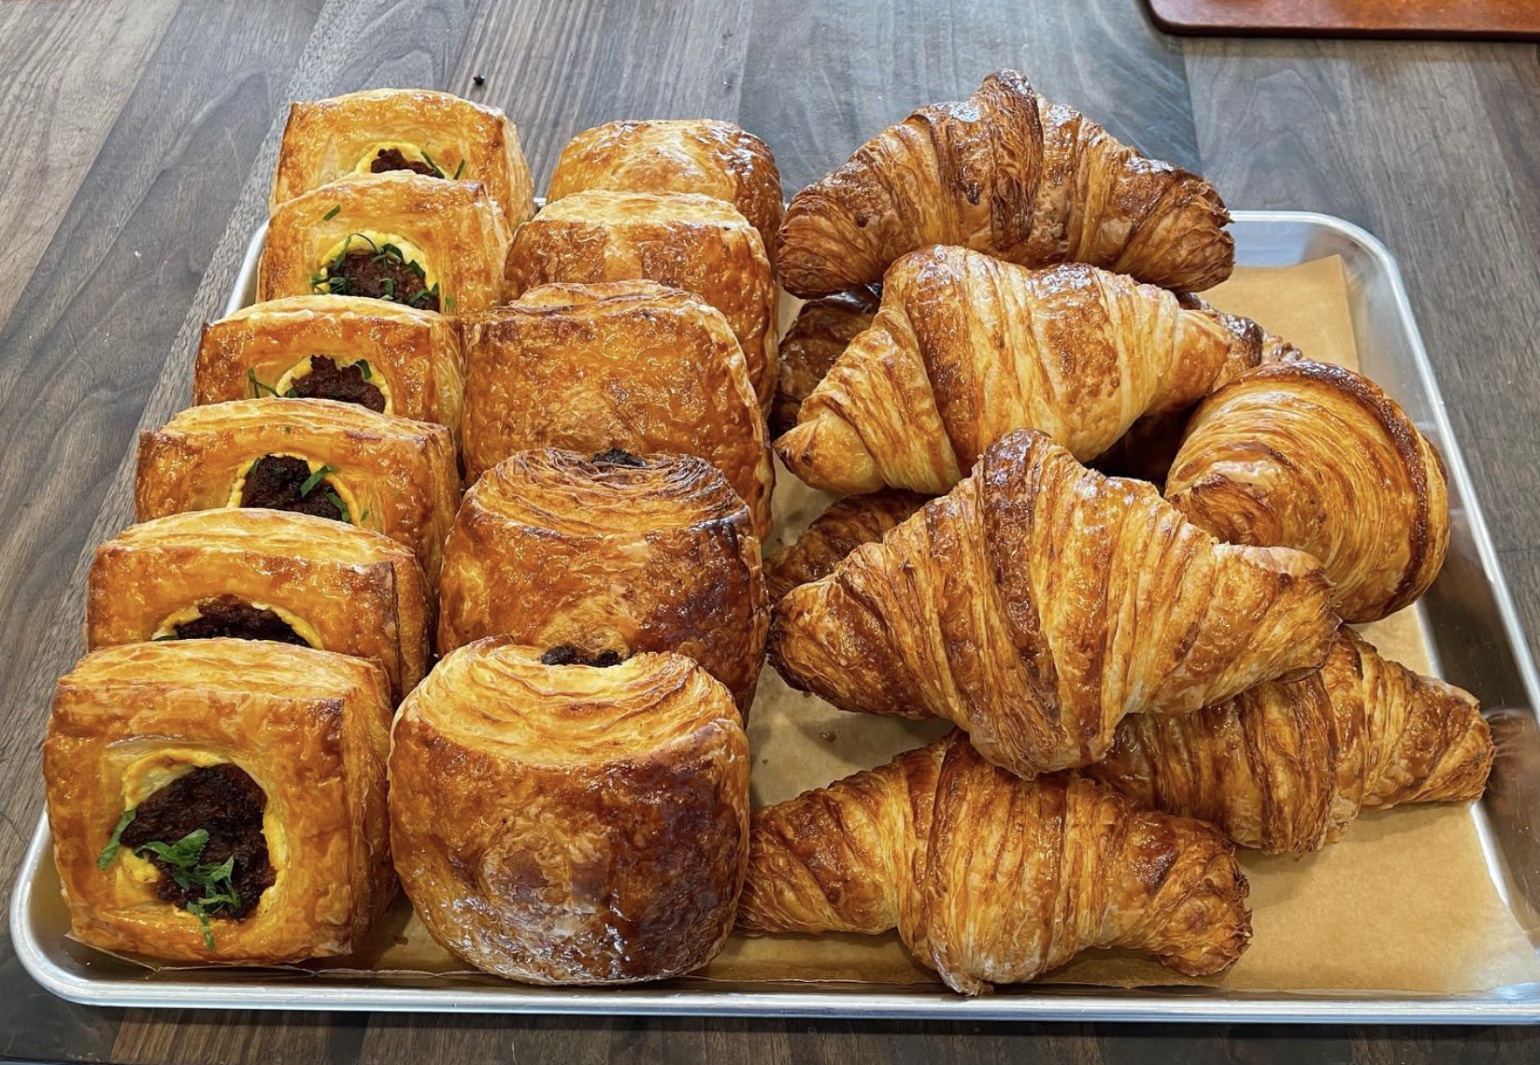 Tray of croissants and pastries from Brickmaiden Breads in Point Reyes Station, California